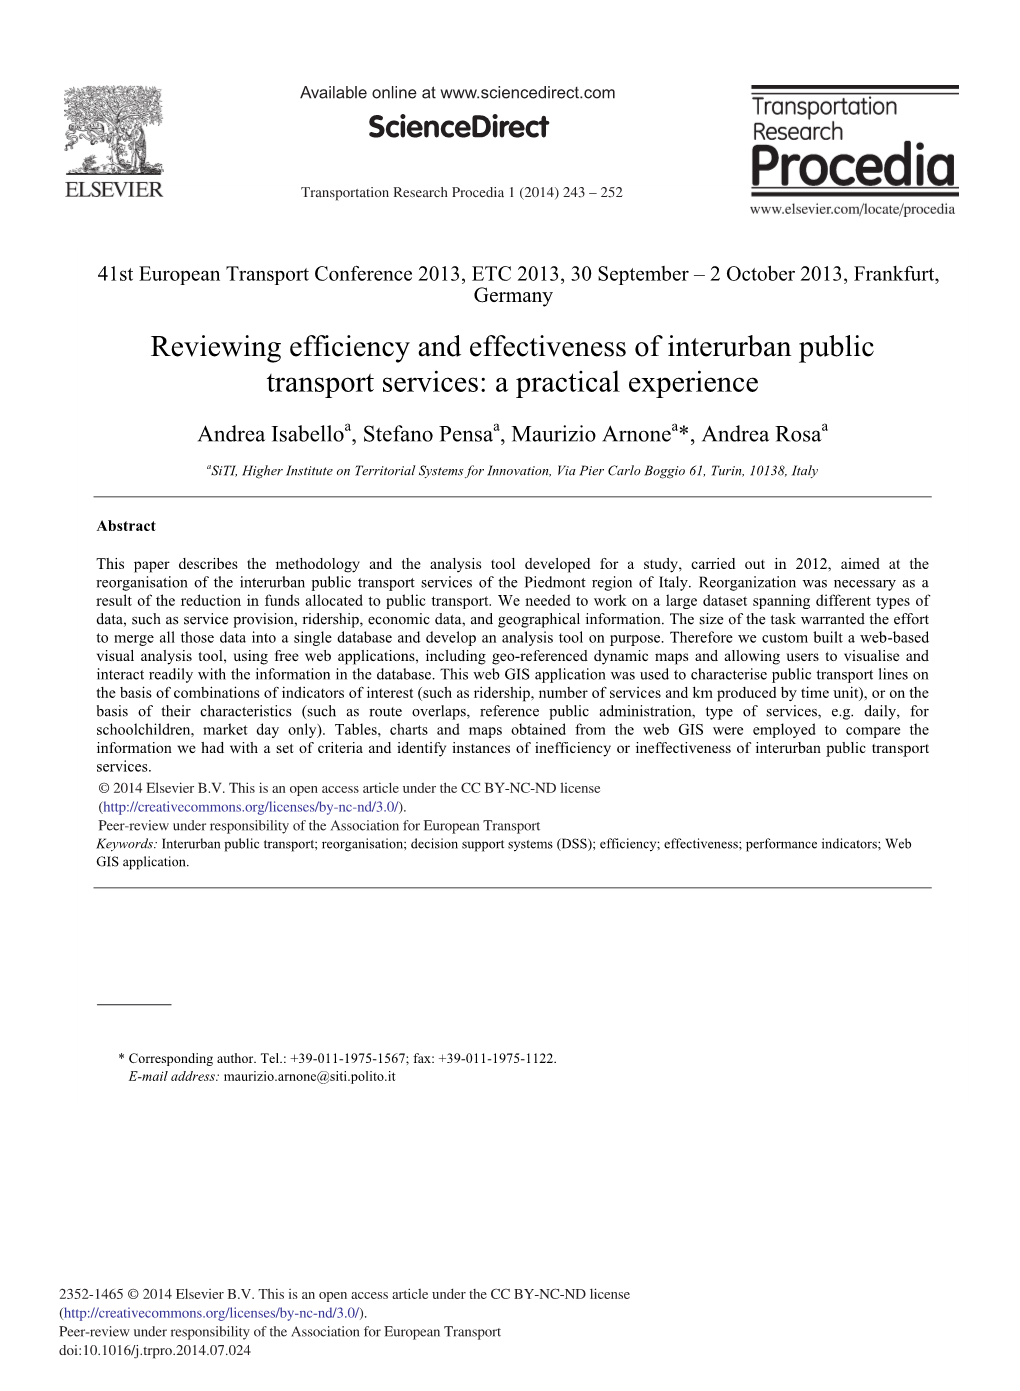 Reviewing Efficiency and Effectiveness of Interurban Public Transport Services: a Practical Experience